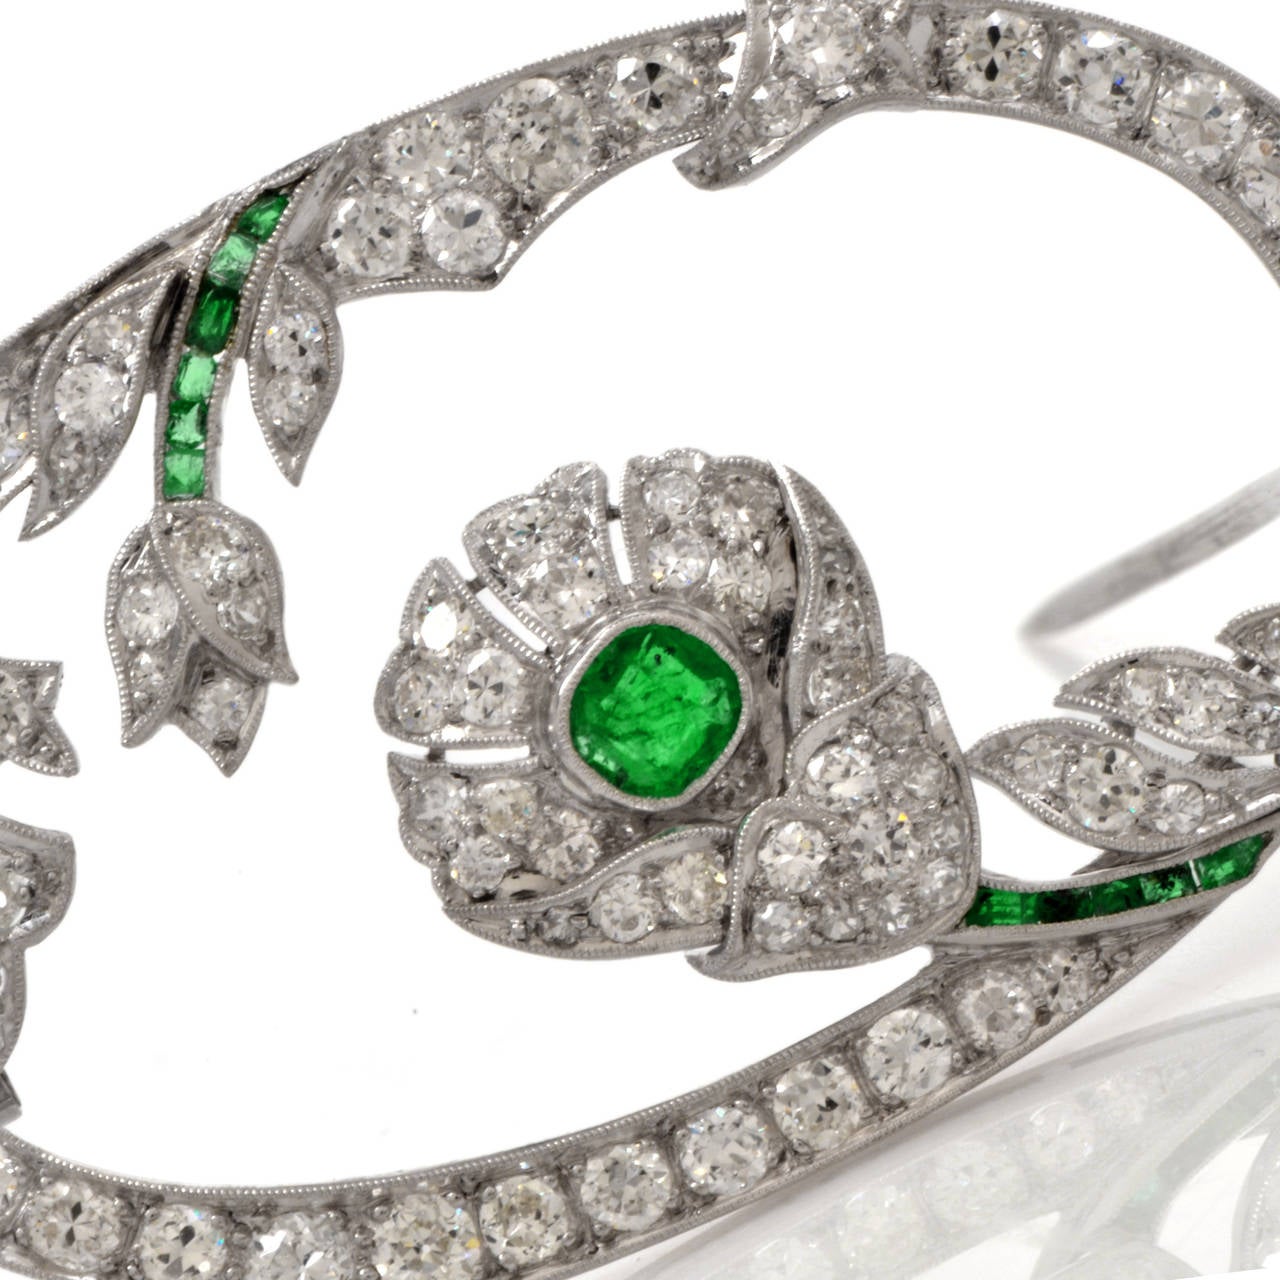 This captivating Antique Art Deco brooch Pin is crafted in solid platinum. This brooch is cumulatively enriched with genuine round European cut diamonds approx: 3.85cttw, G-H color, VS clarity and one cushion-cut and 12 tapered baguette Green